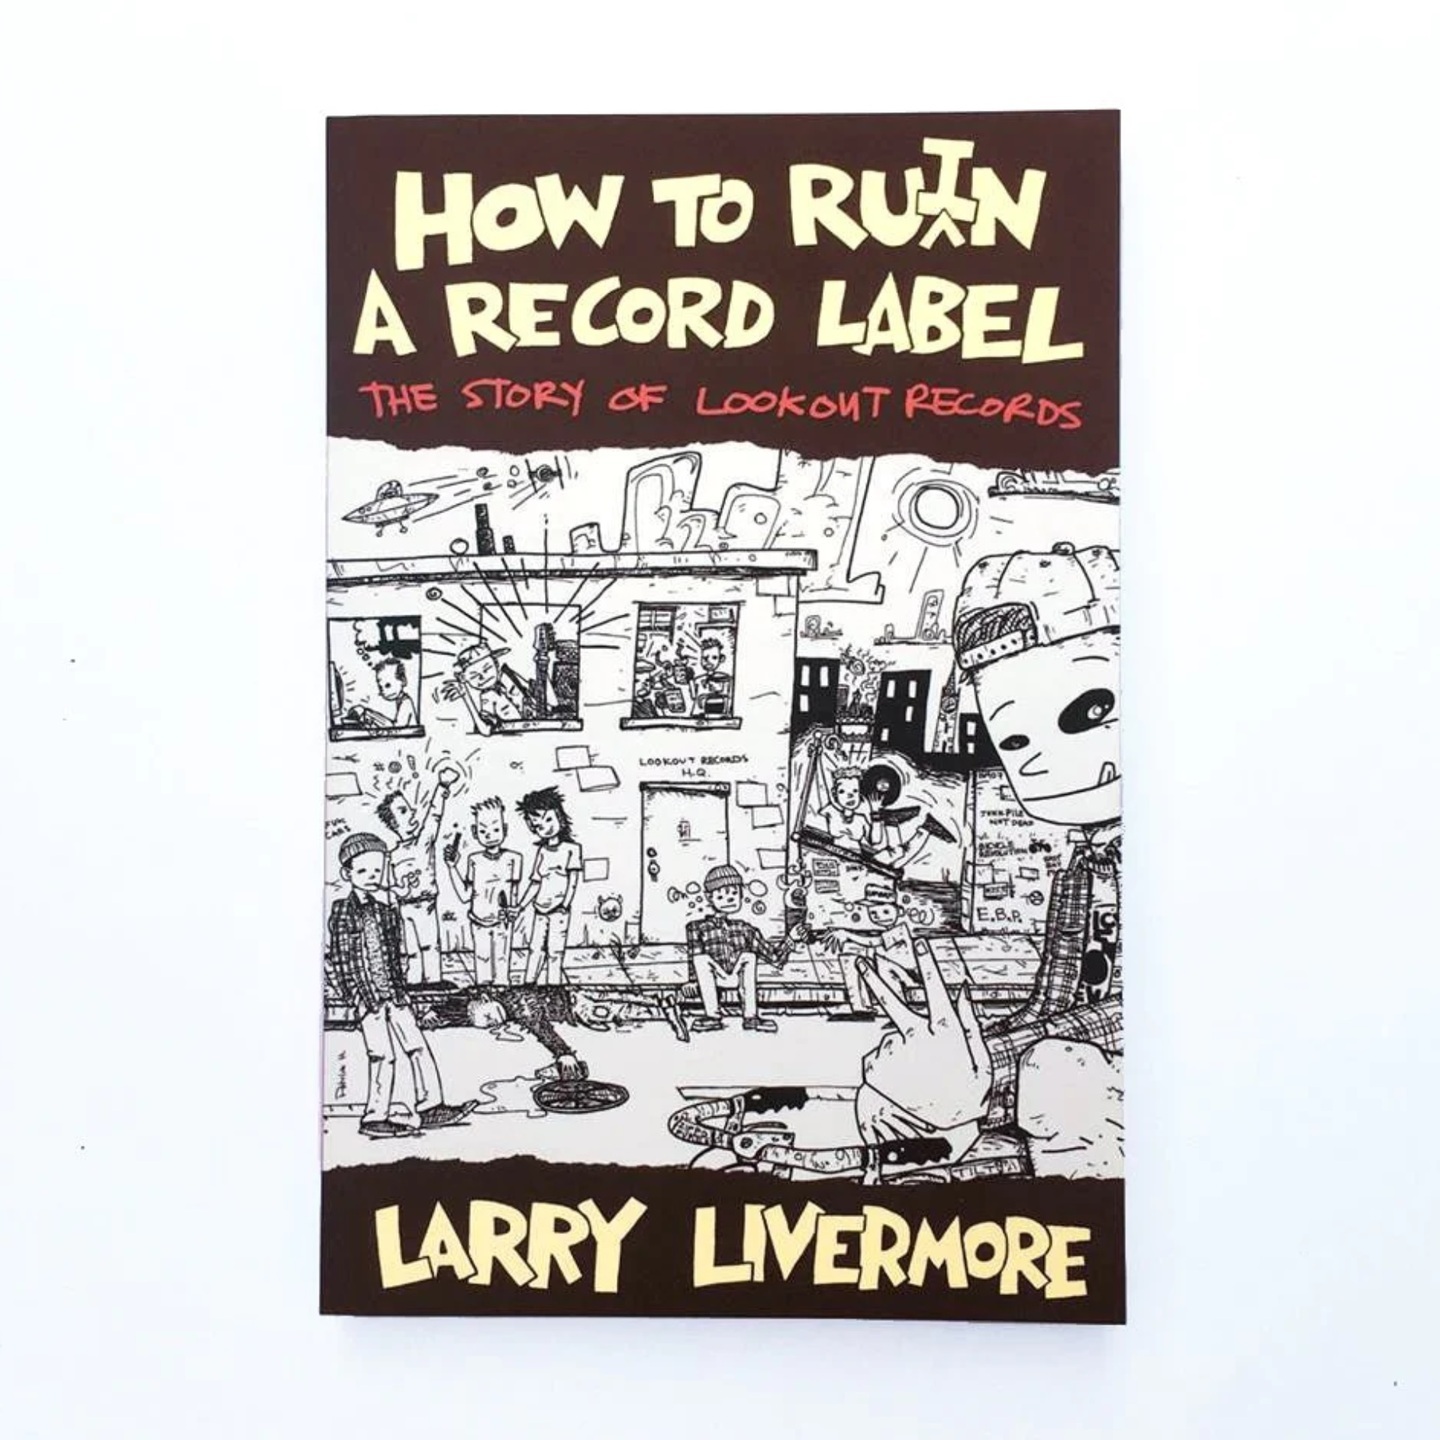 How To Ruin a Record Label The Story of Lookout Records